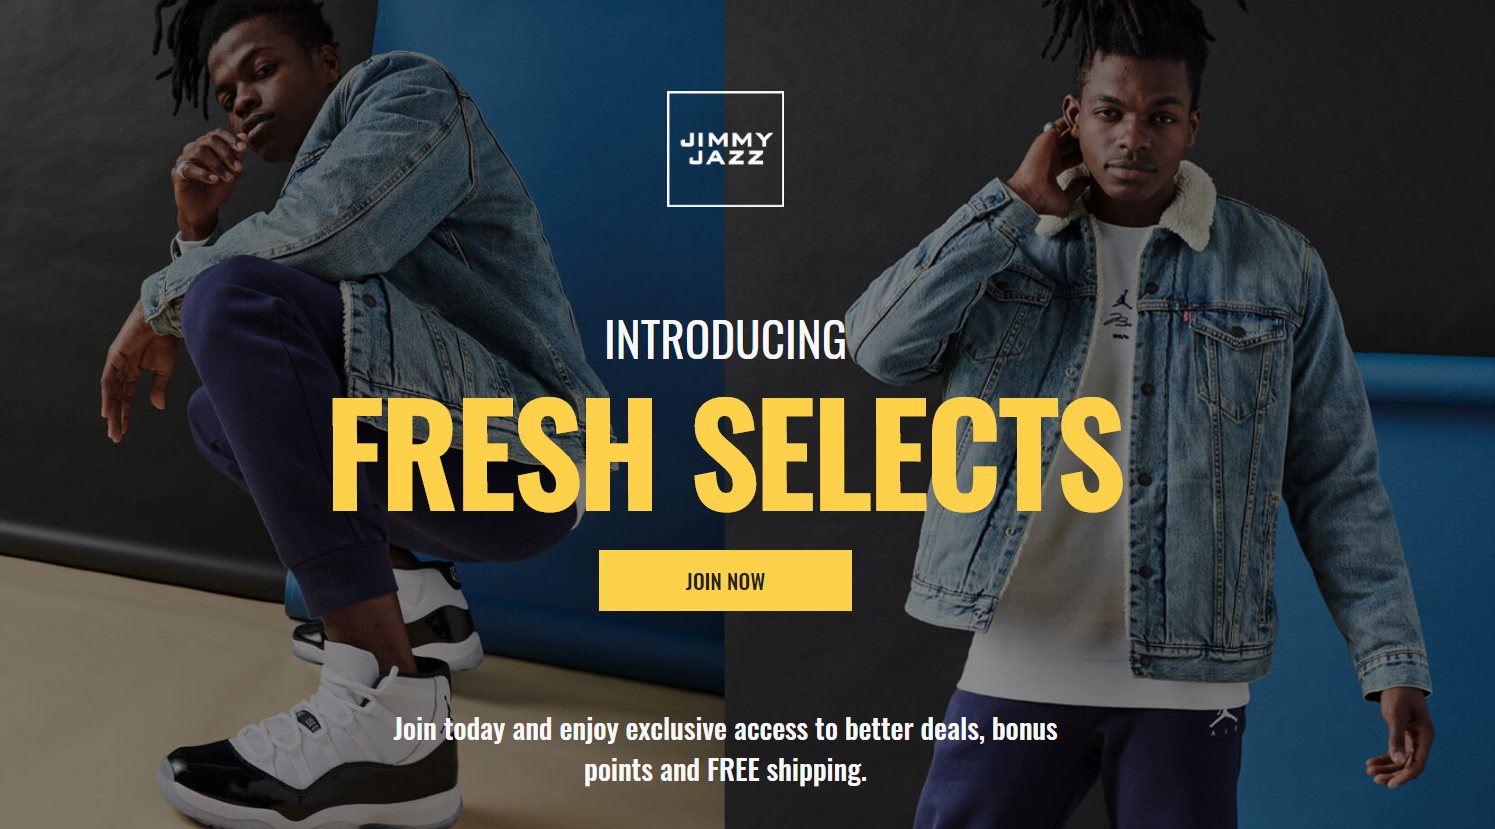 US-based streetwear retailer Jimmy Jazz runs a raffle on Facebook that is independent of its loyalty program. However, members of the Fresh Selects program automatically receive additional entries as a ‘custom’ benefit.